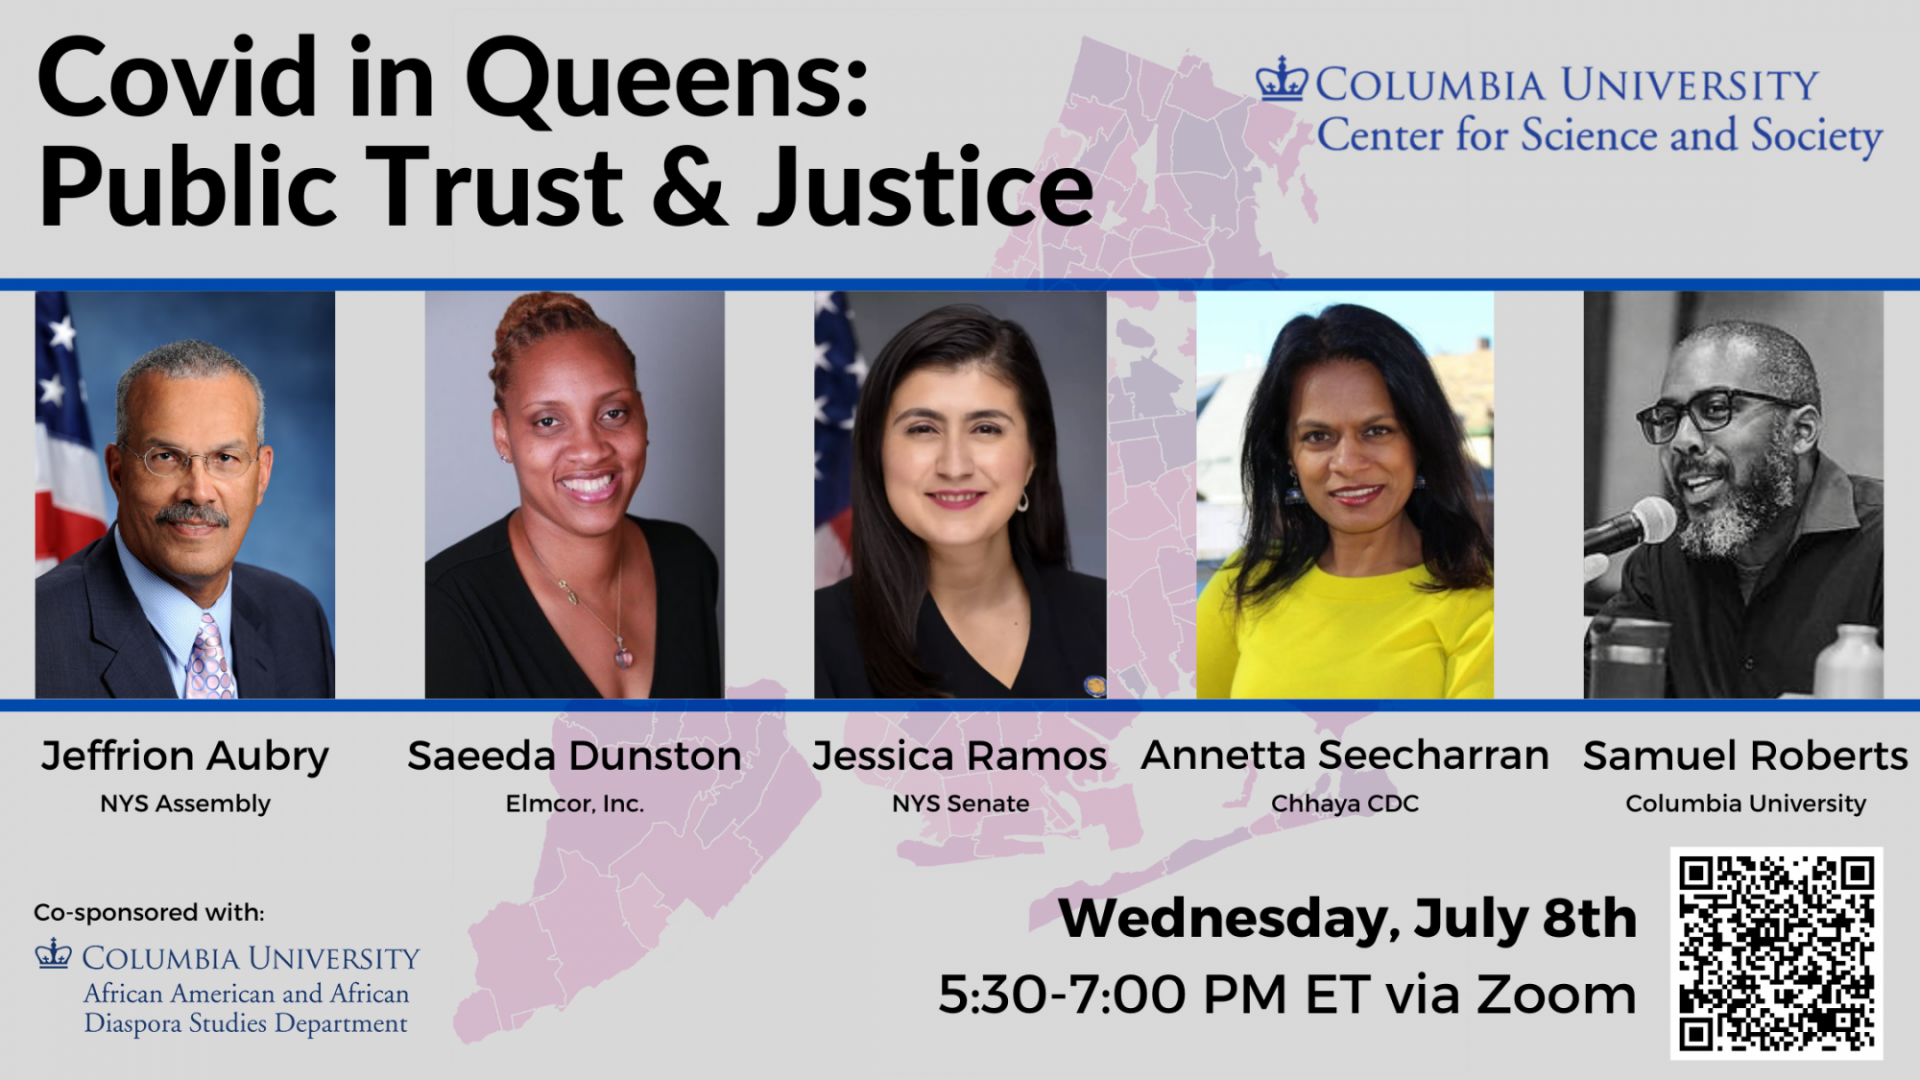 Image of event speakers with event title "Covid in Queens: Public Trust & Justice"